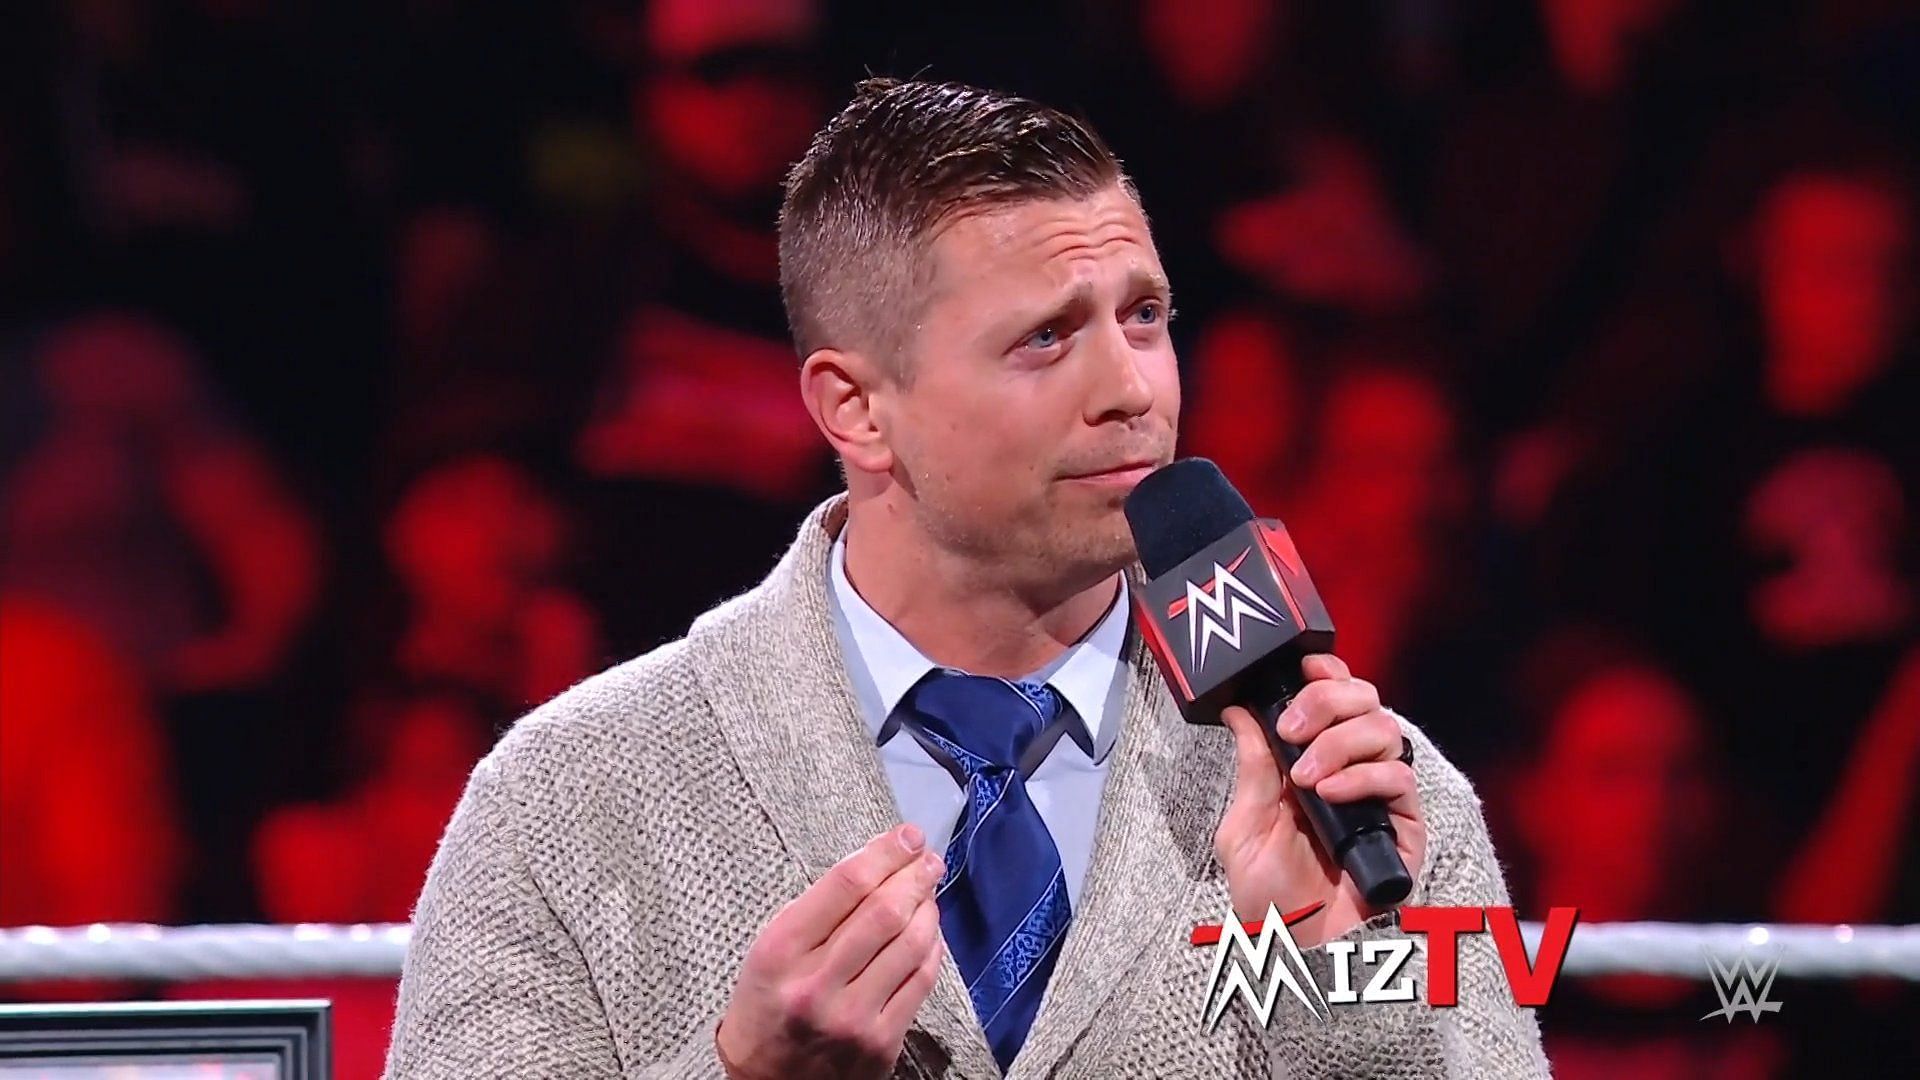 The Miz came out to the ring on WWE RAW to ask for an apology